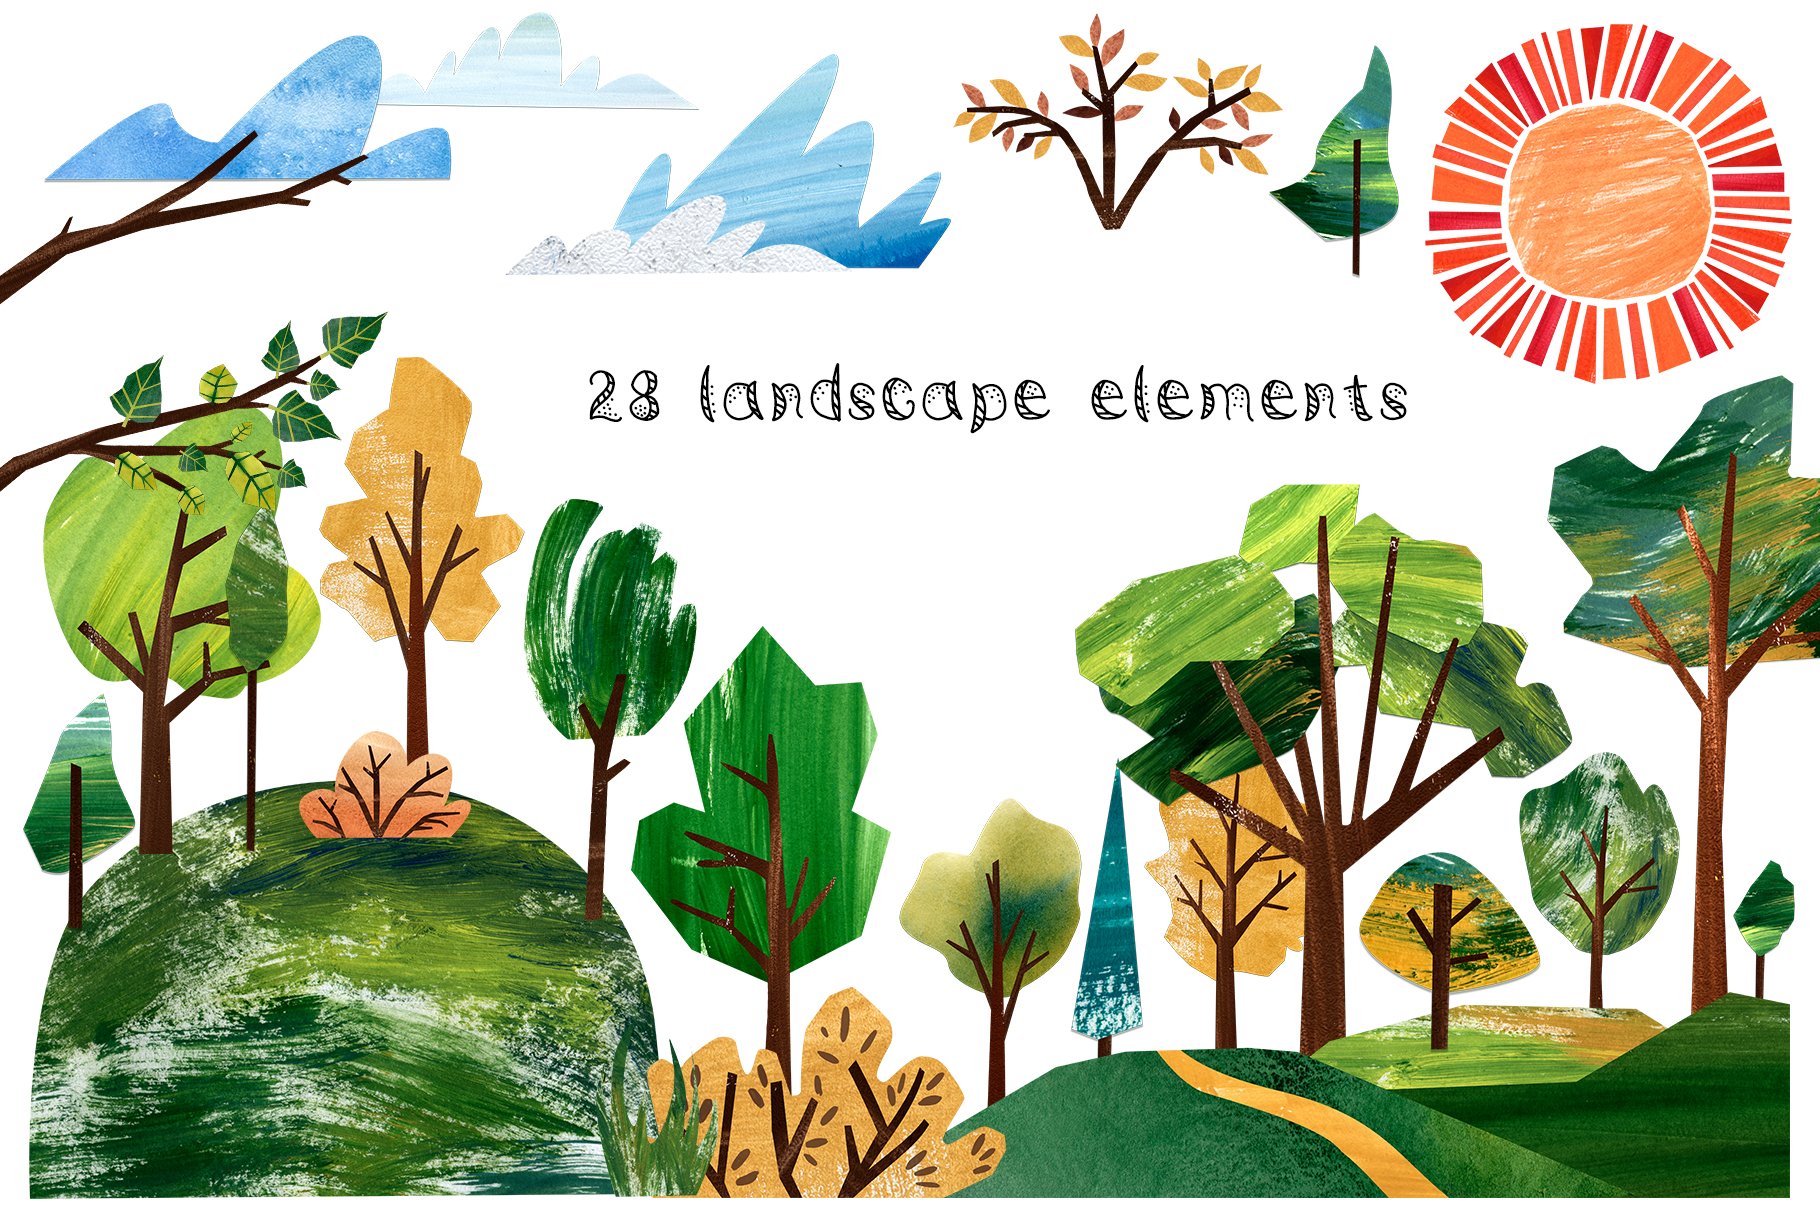 There are 28 landscape elements.